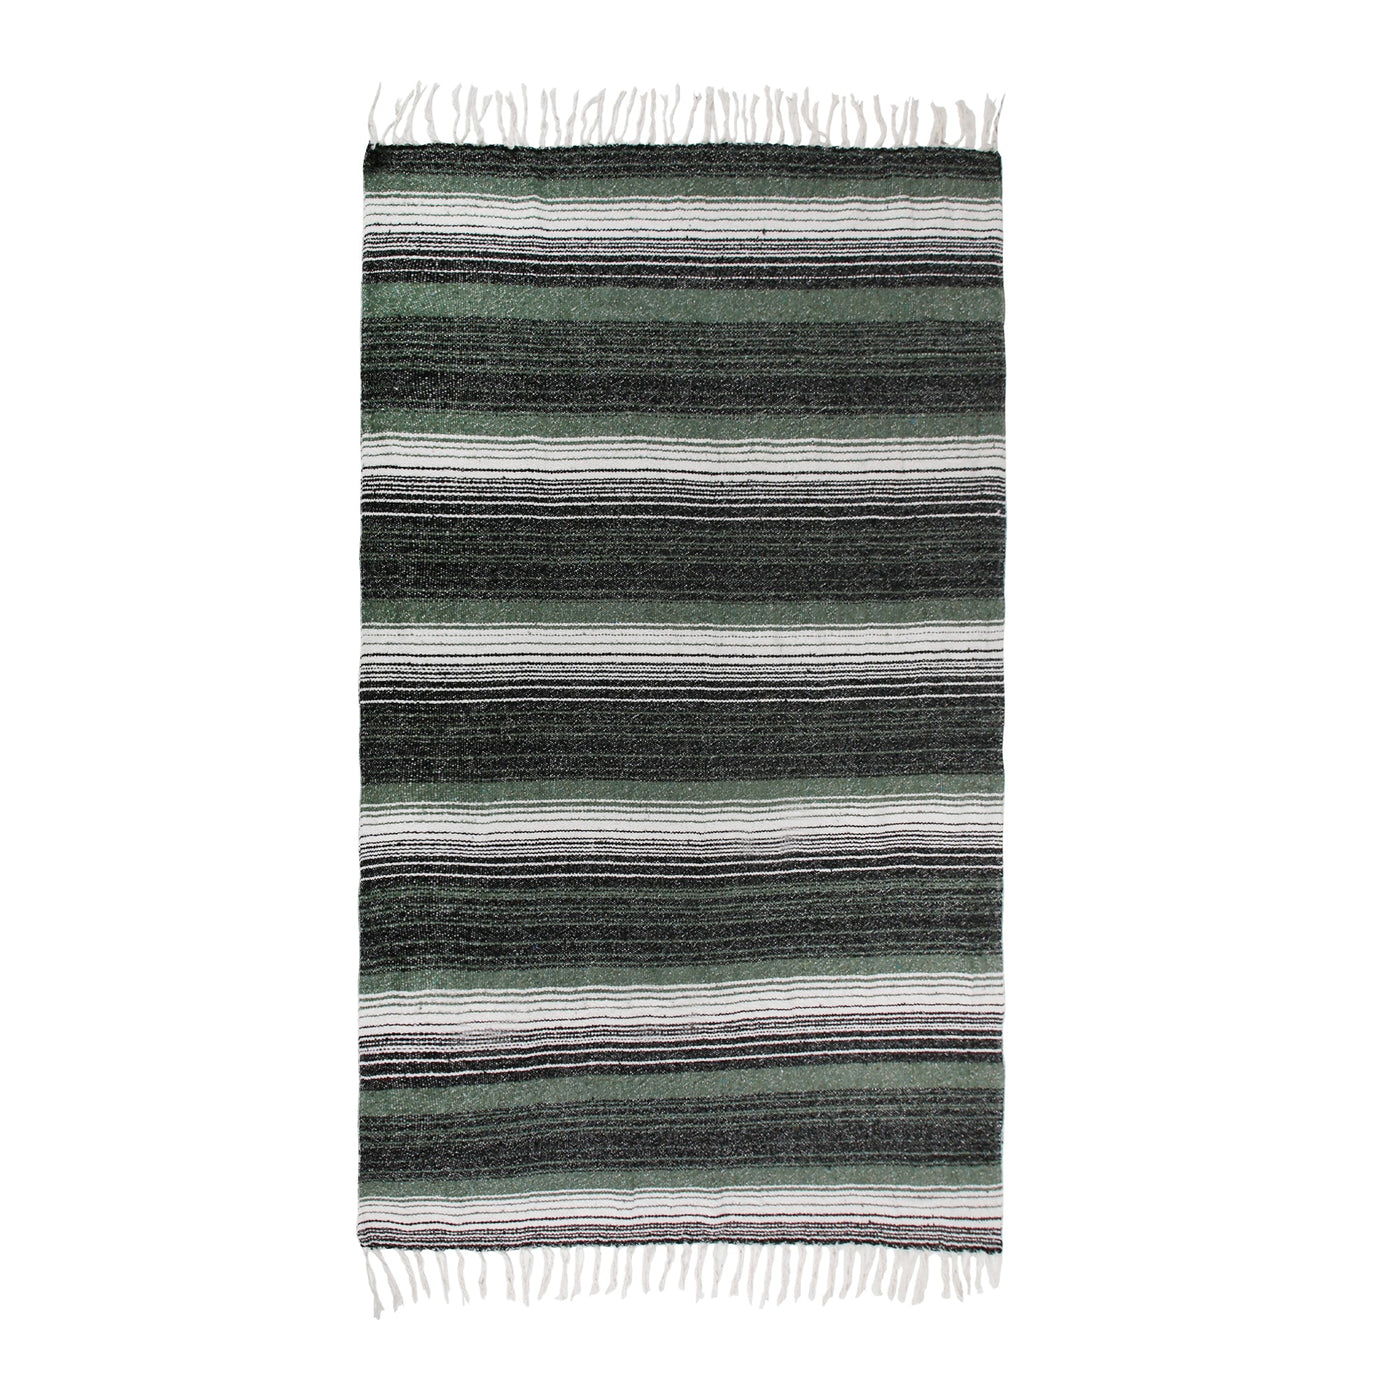 Traditional Mexican Blanket Stripe Pure Cotton Beach Throw (50"x70") by La'Hammam